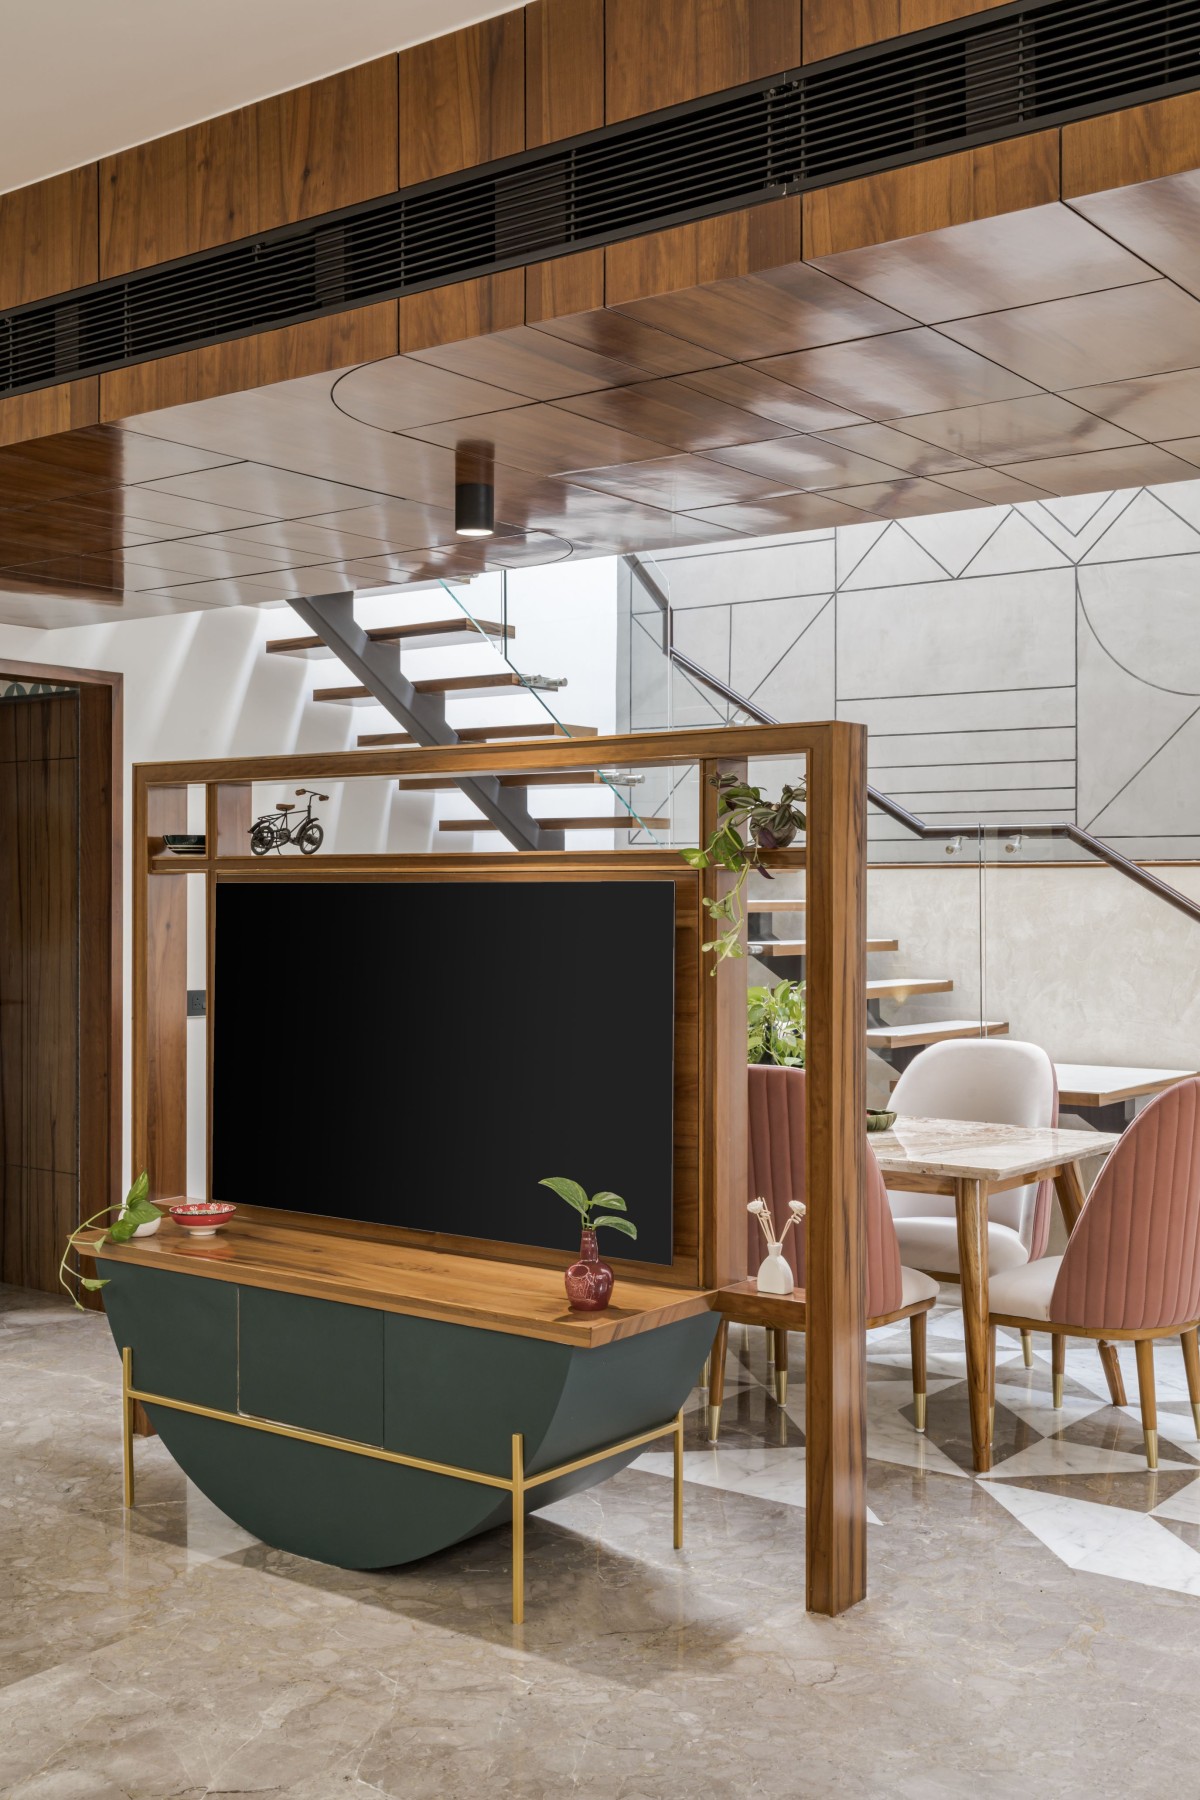 An eclectic TV unit divides the open plan in two parts of public and semi public areas.